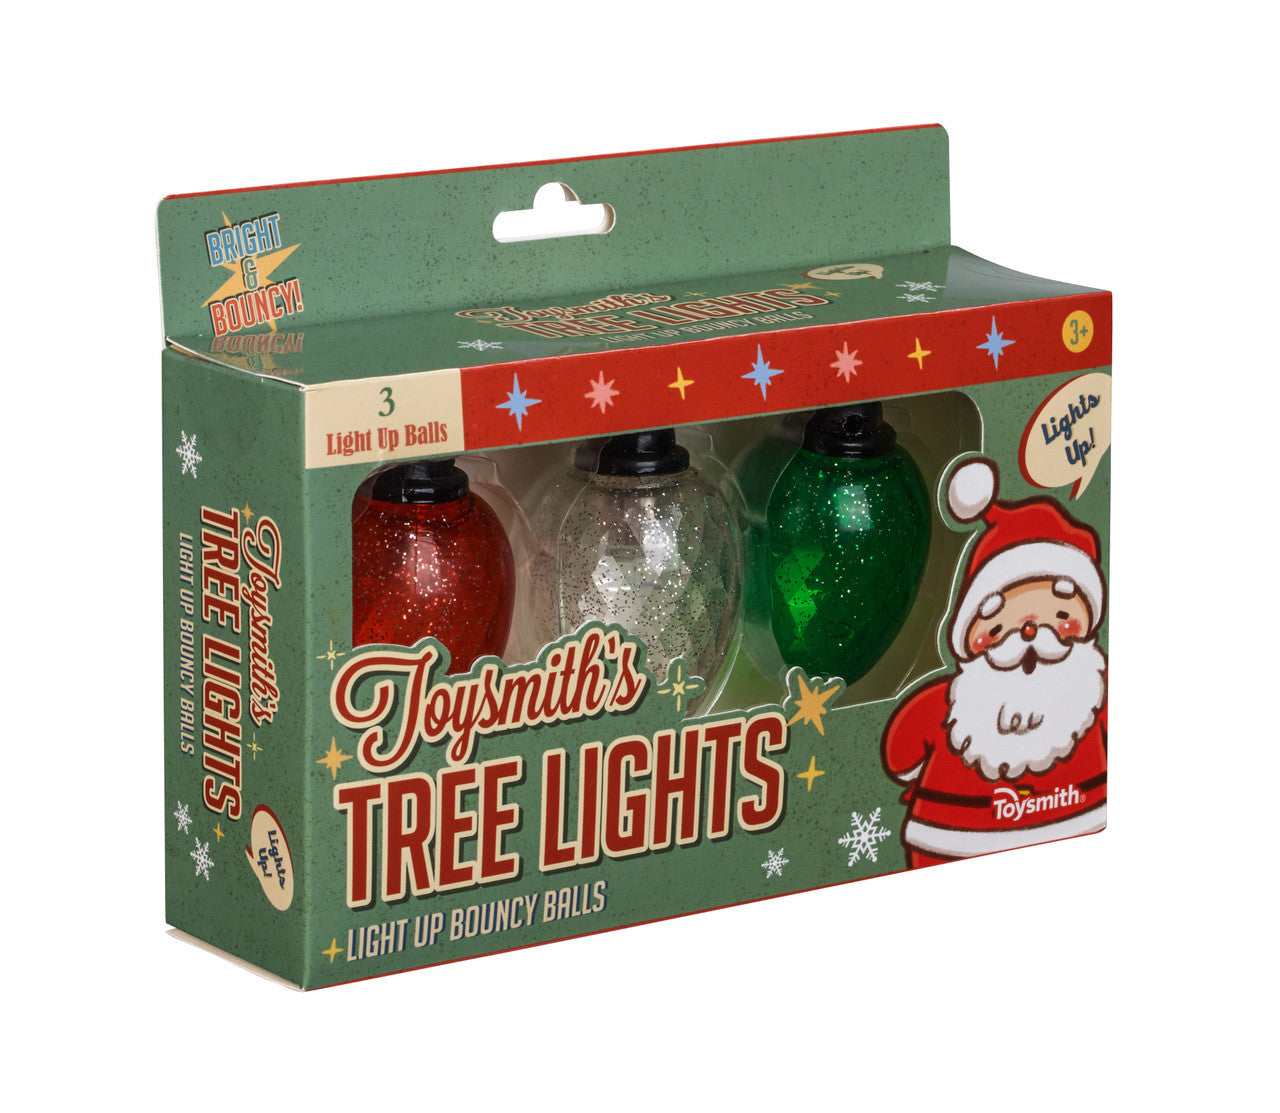 Front view of Light Up Ornament Bouncy Balls box.